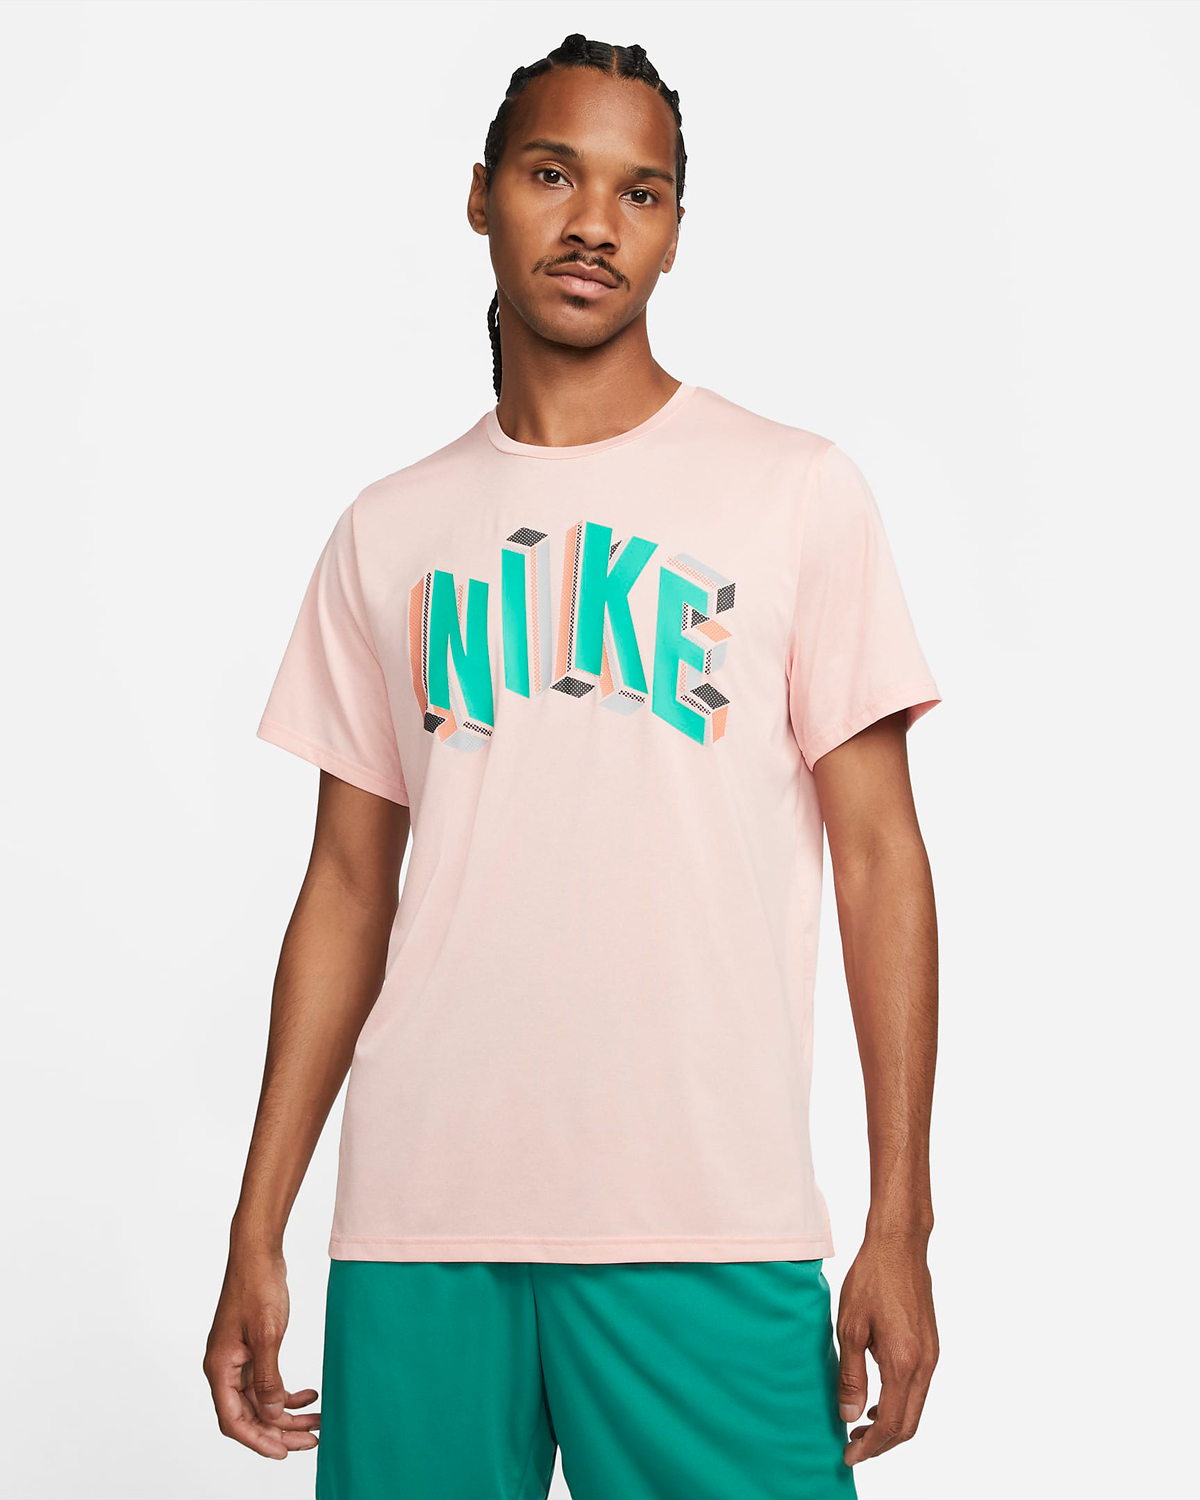 nike-dunk-low-snakeskin-washed-teal-bleached-coral-shirt